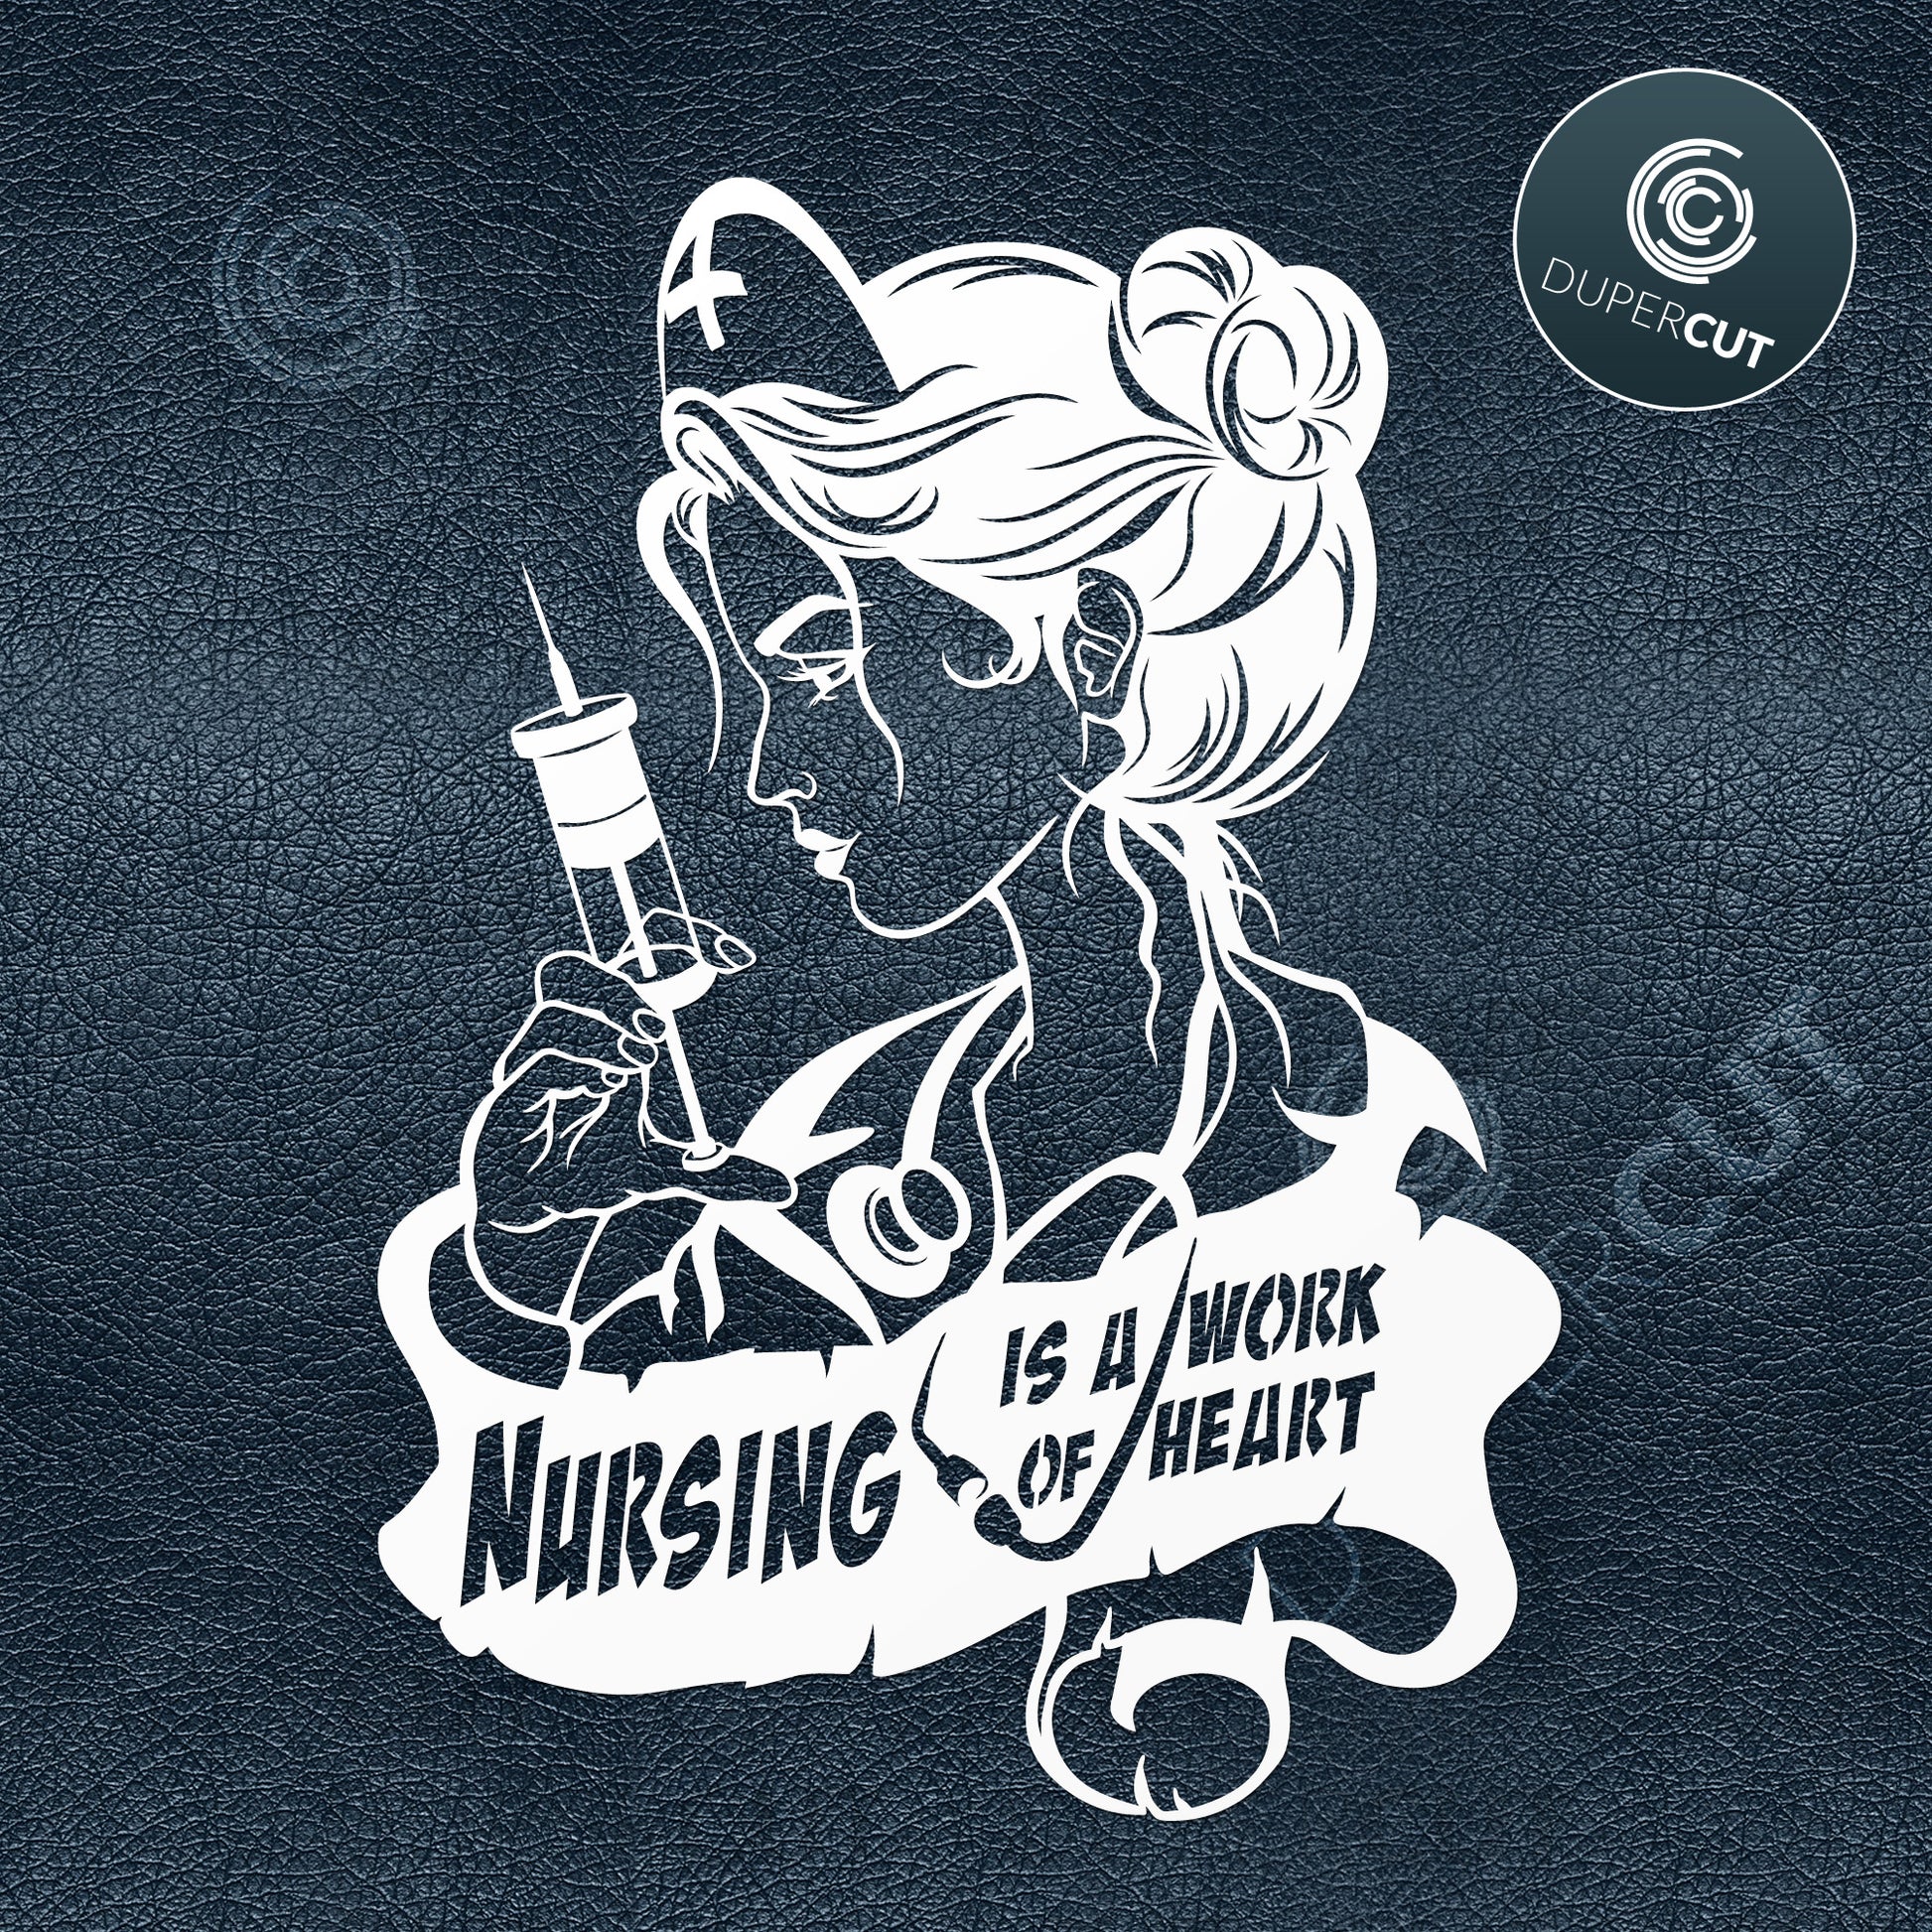 Nurse line art. Nursing quotes. SVG JPEG DXF files. Template for paper cutting, laser, print on demand. For use with Cricut, Glowforge, Silhouette Cameo, CNC machines. Personal or commercial license.